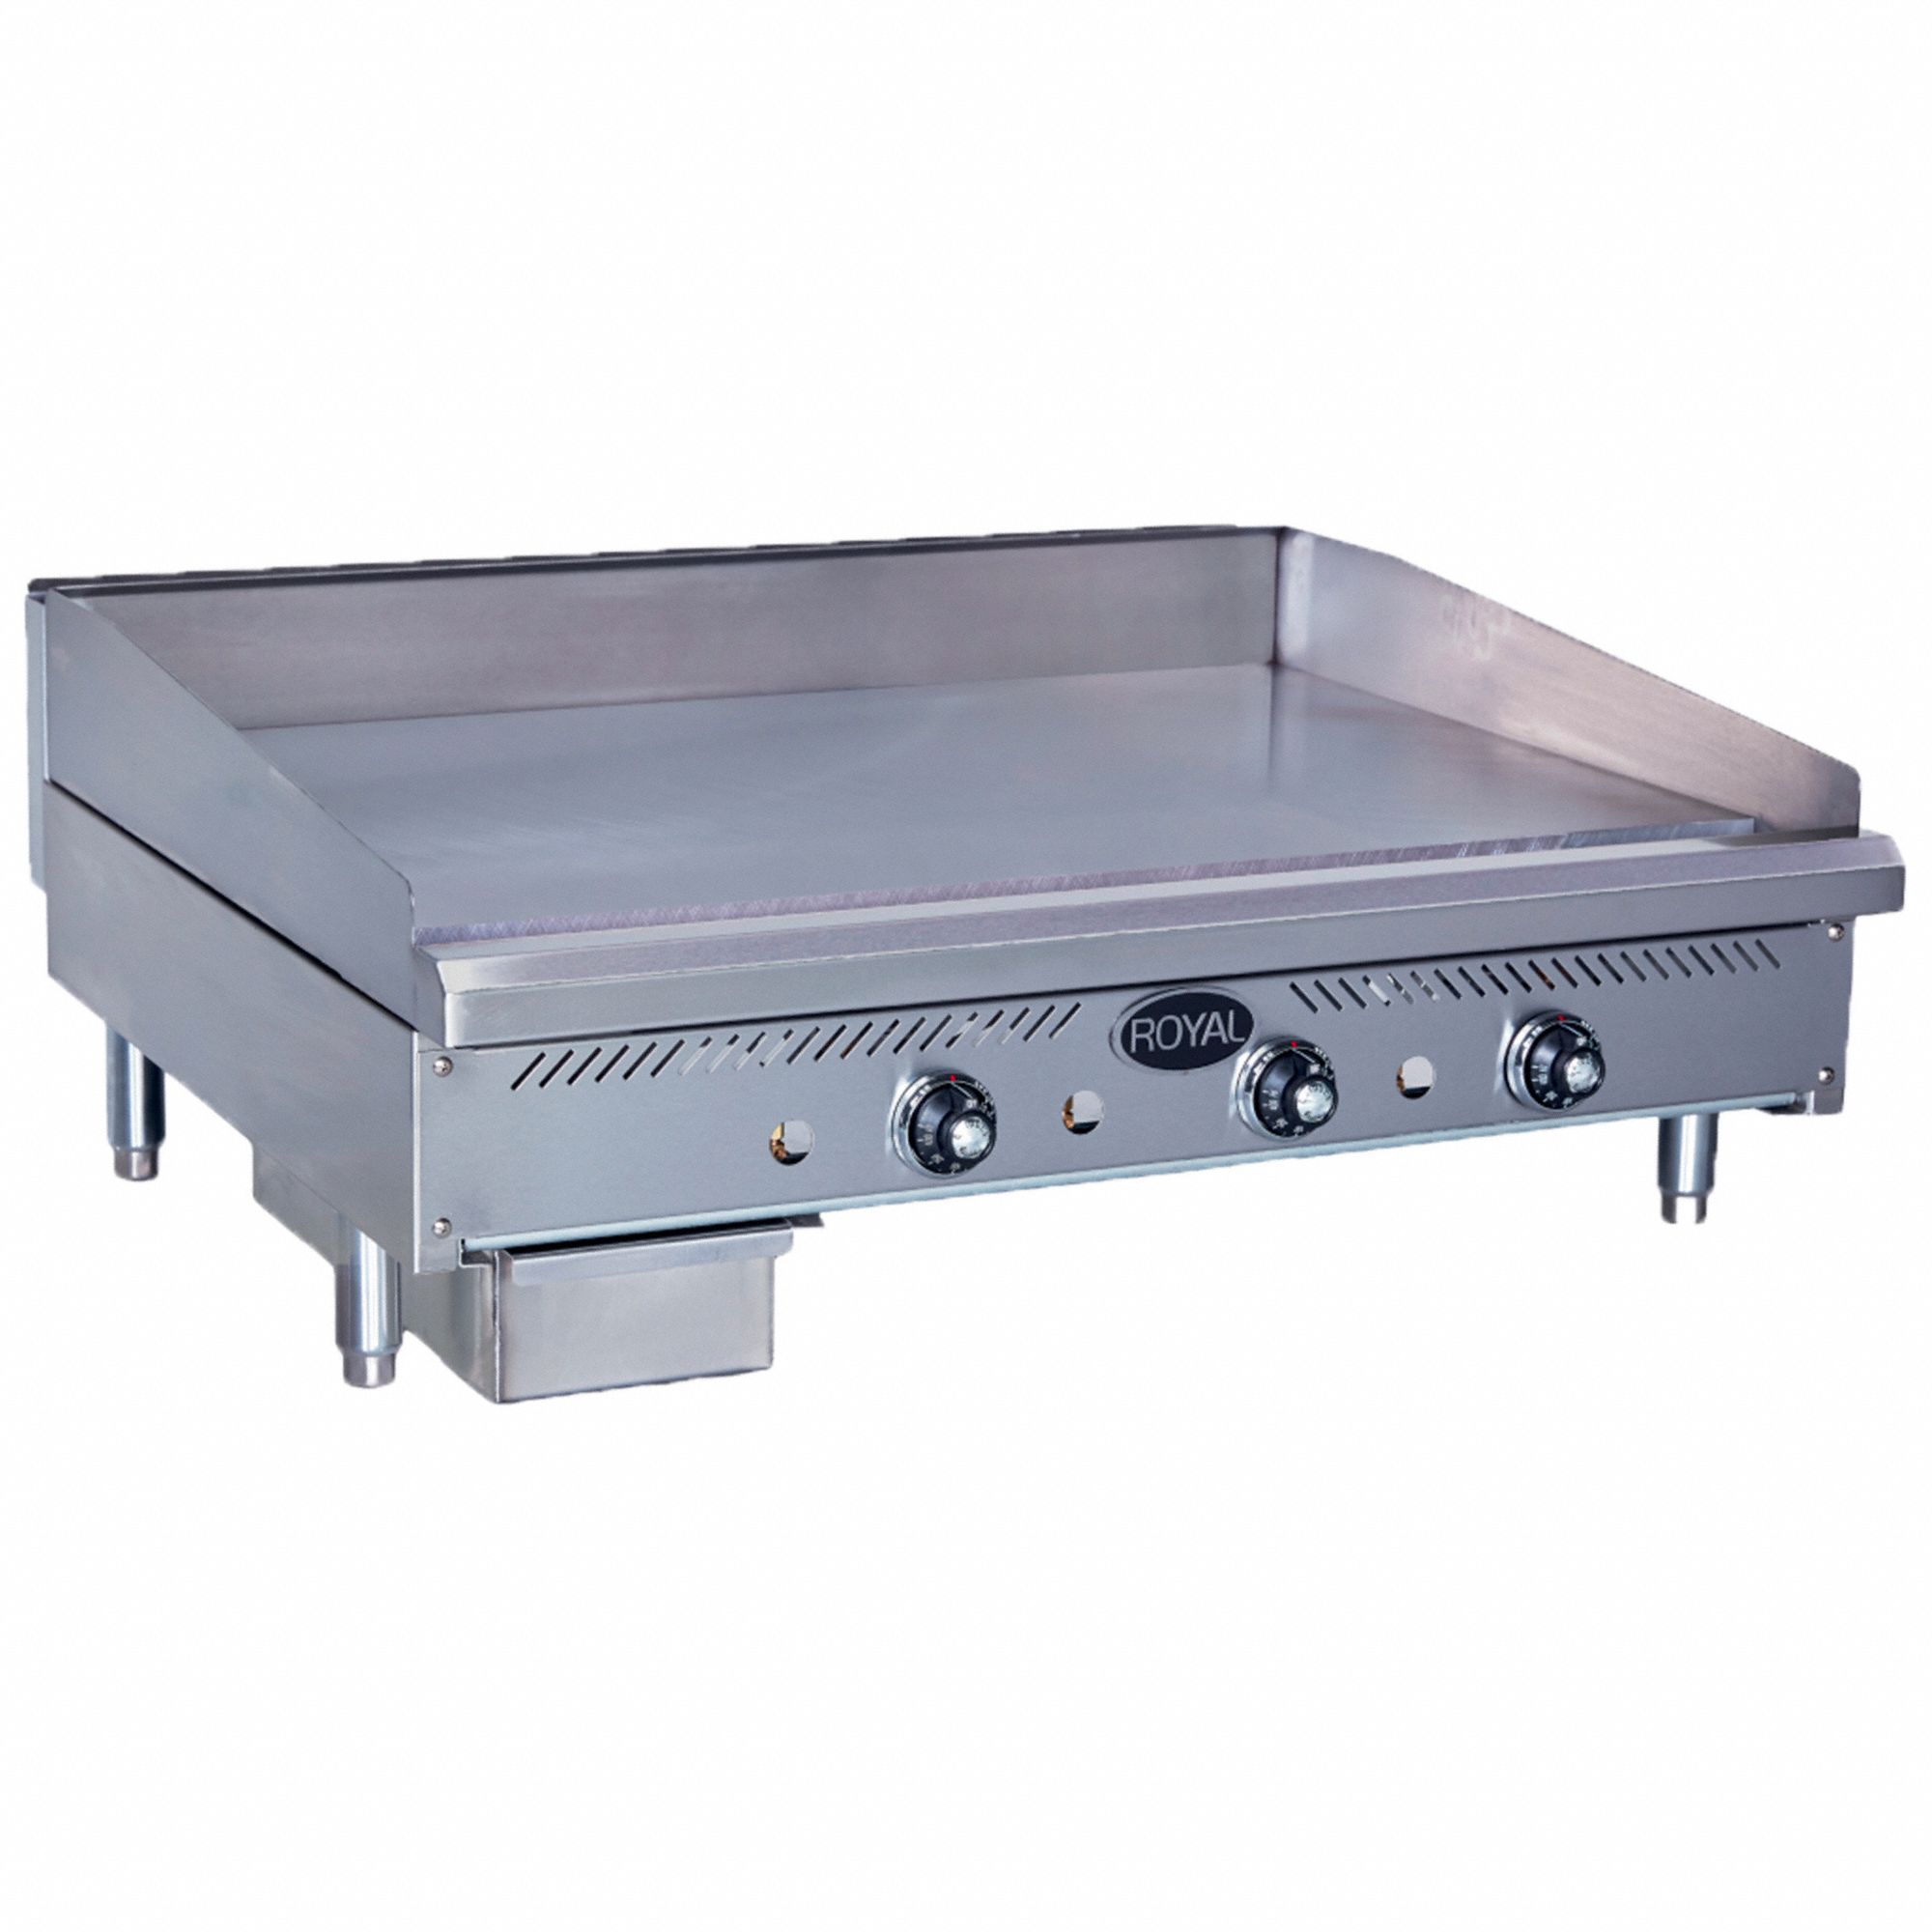 Natural Gas Griddle: Gas, Thermostatic, 23 7/8 in x 24 in Cooking Surface